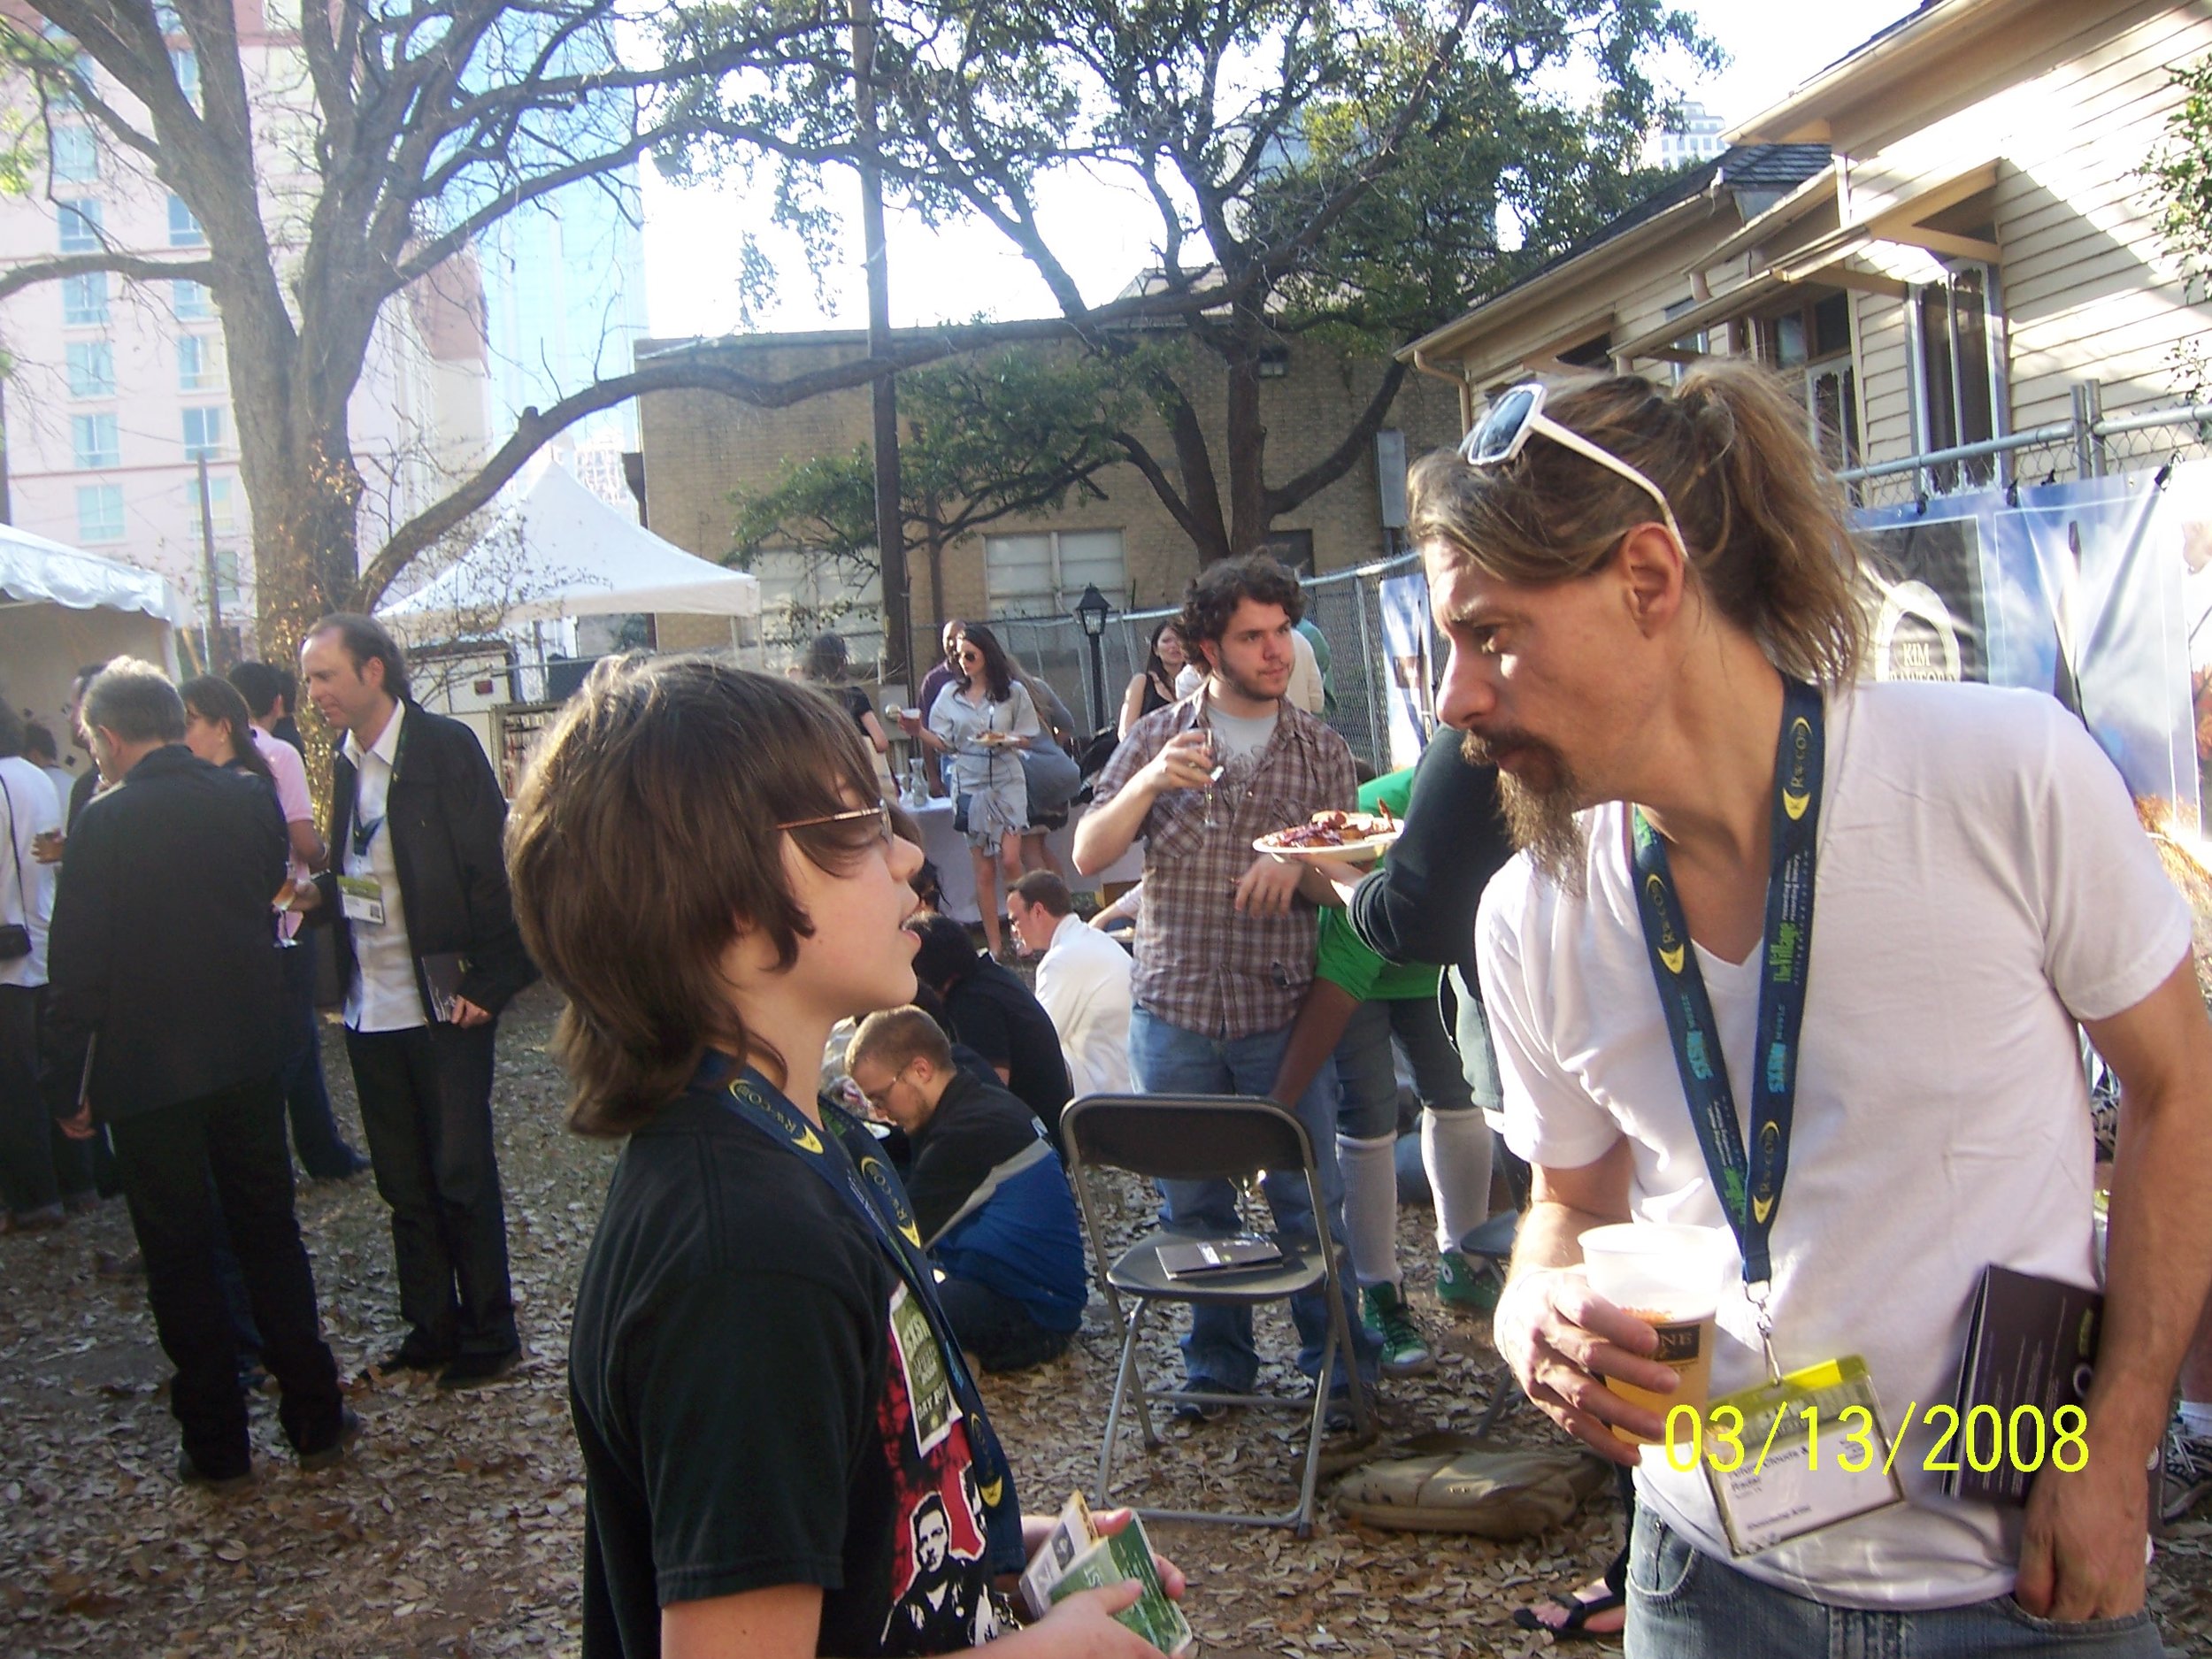 My son Zed and Robert Harrison (Cotton Mather) at SXSW 2008.